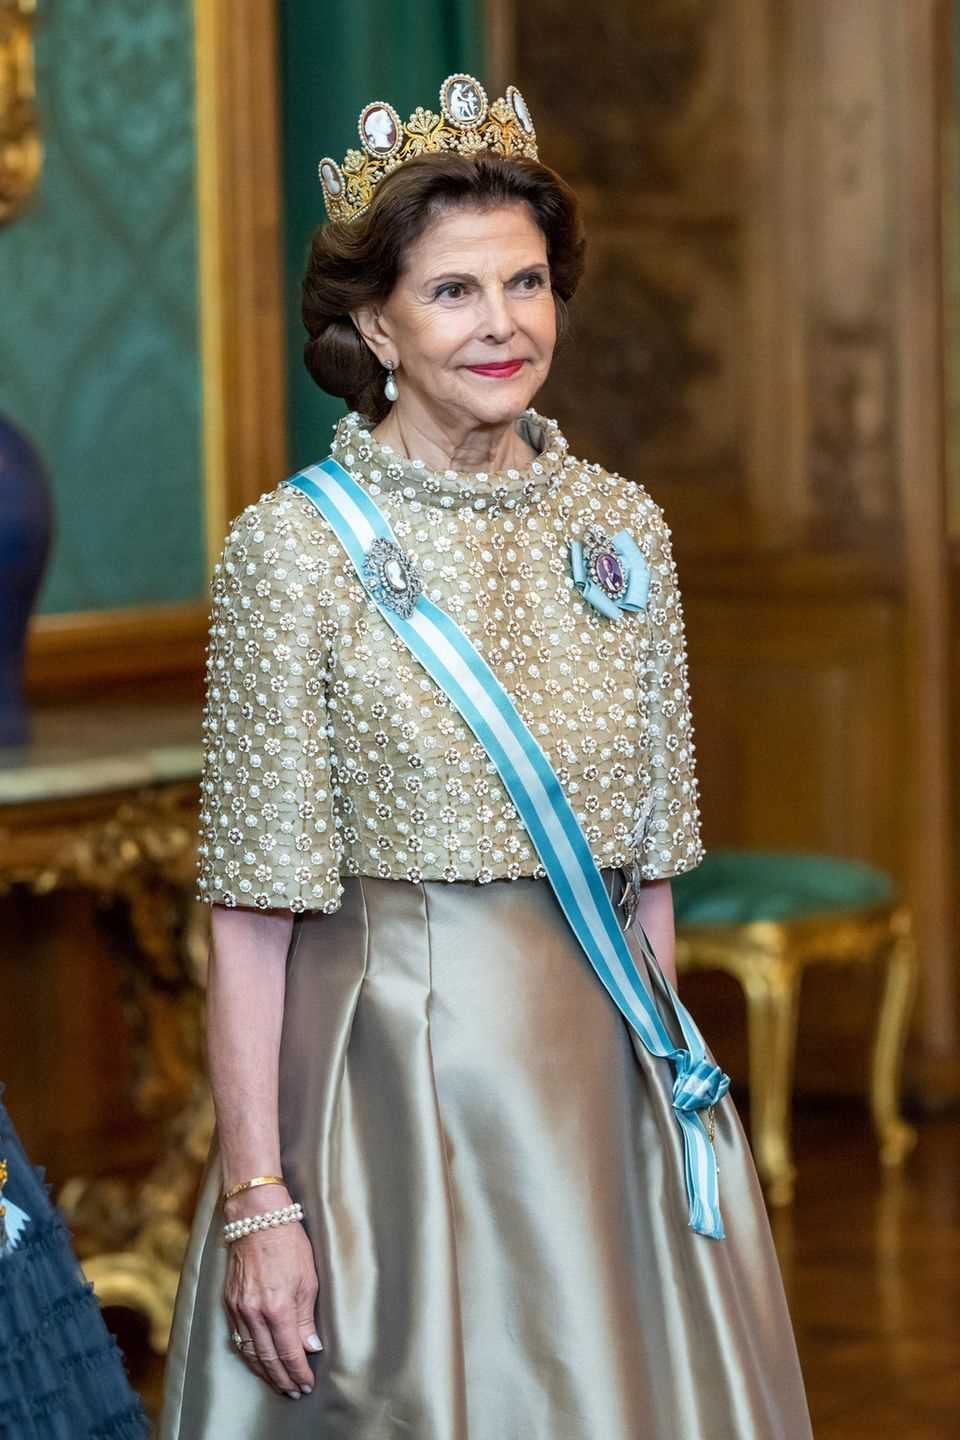 State visit to Sweden: Which royal fashionista stands out in terms of fashion?